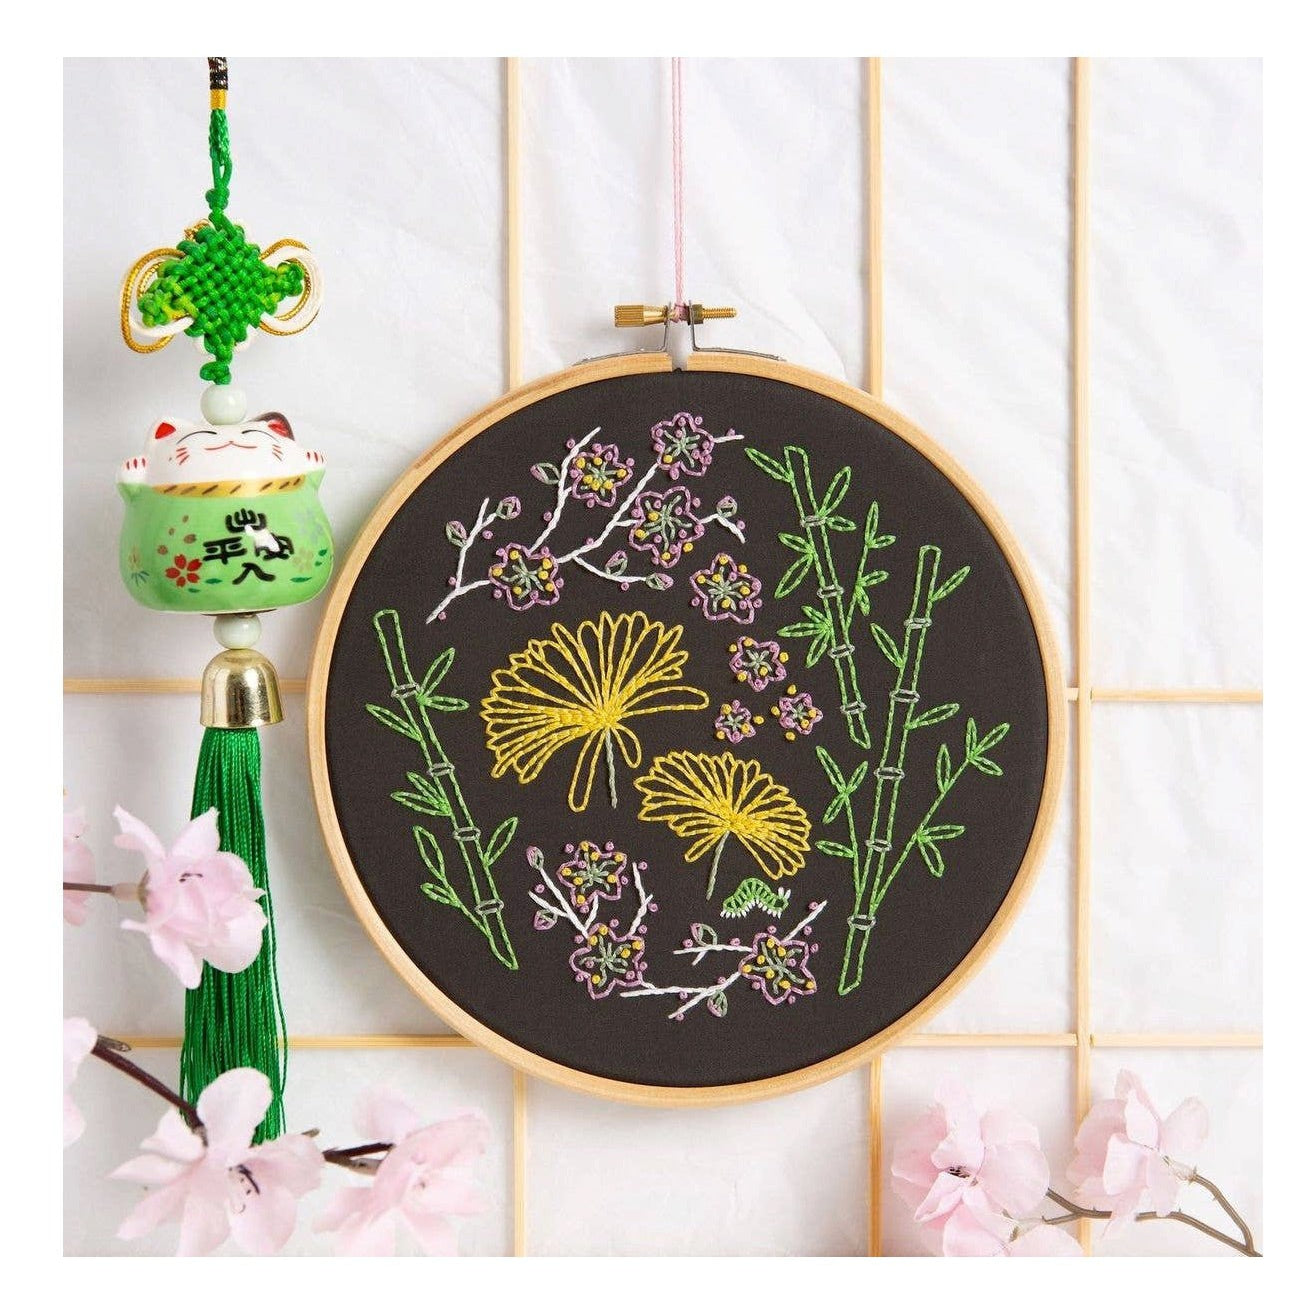 Black Japanese Garden Embroidery Kit | Made in the UK